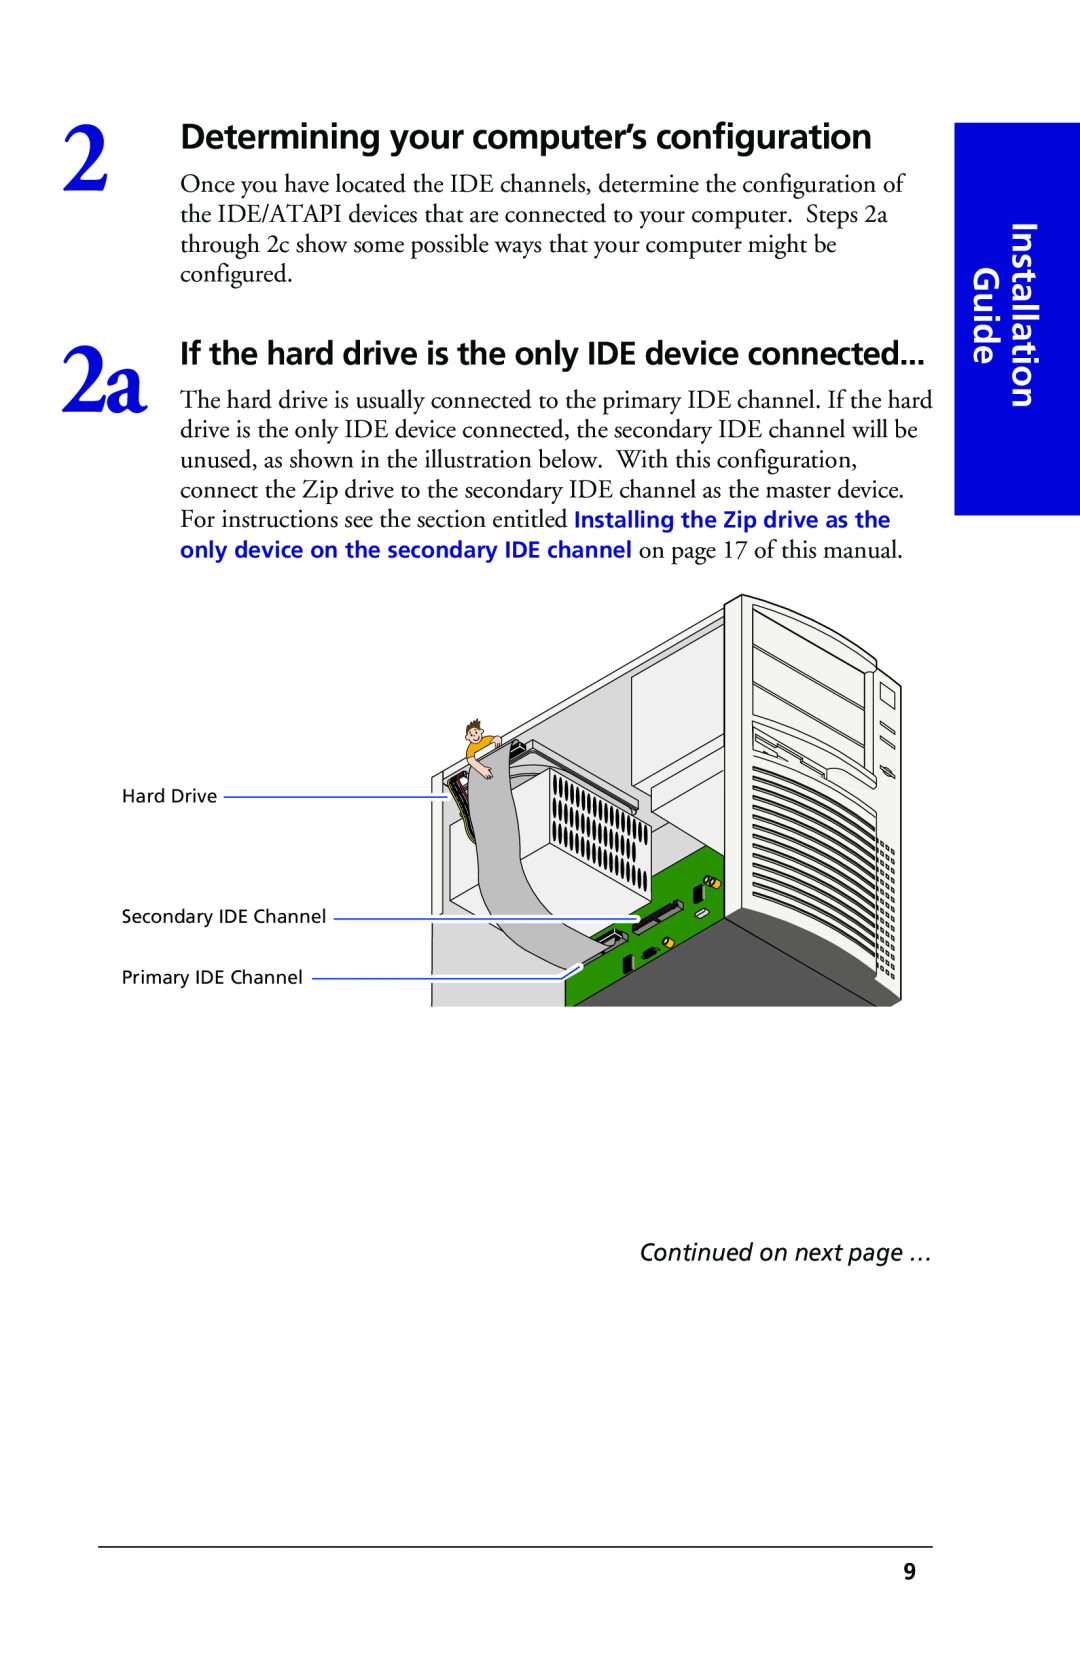 Iomega 03798300 owner manual Determining your computer’s configuration, If the hard drive is the only IDE device connected 